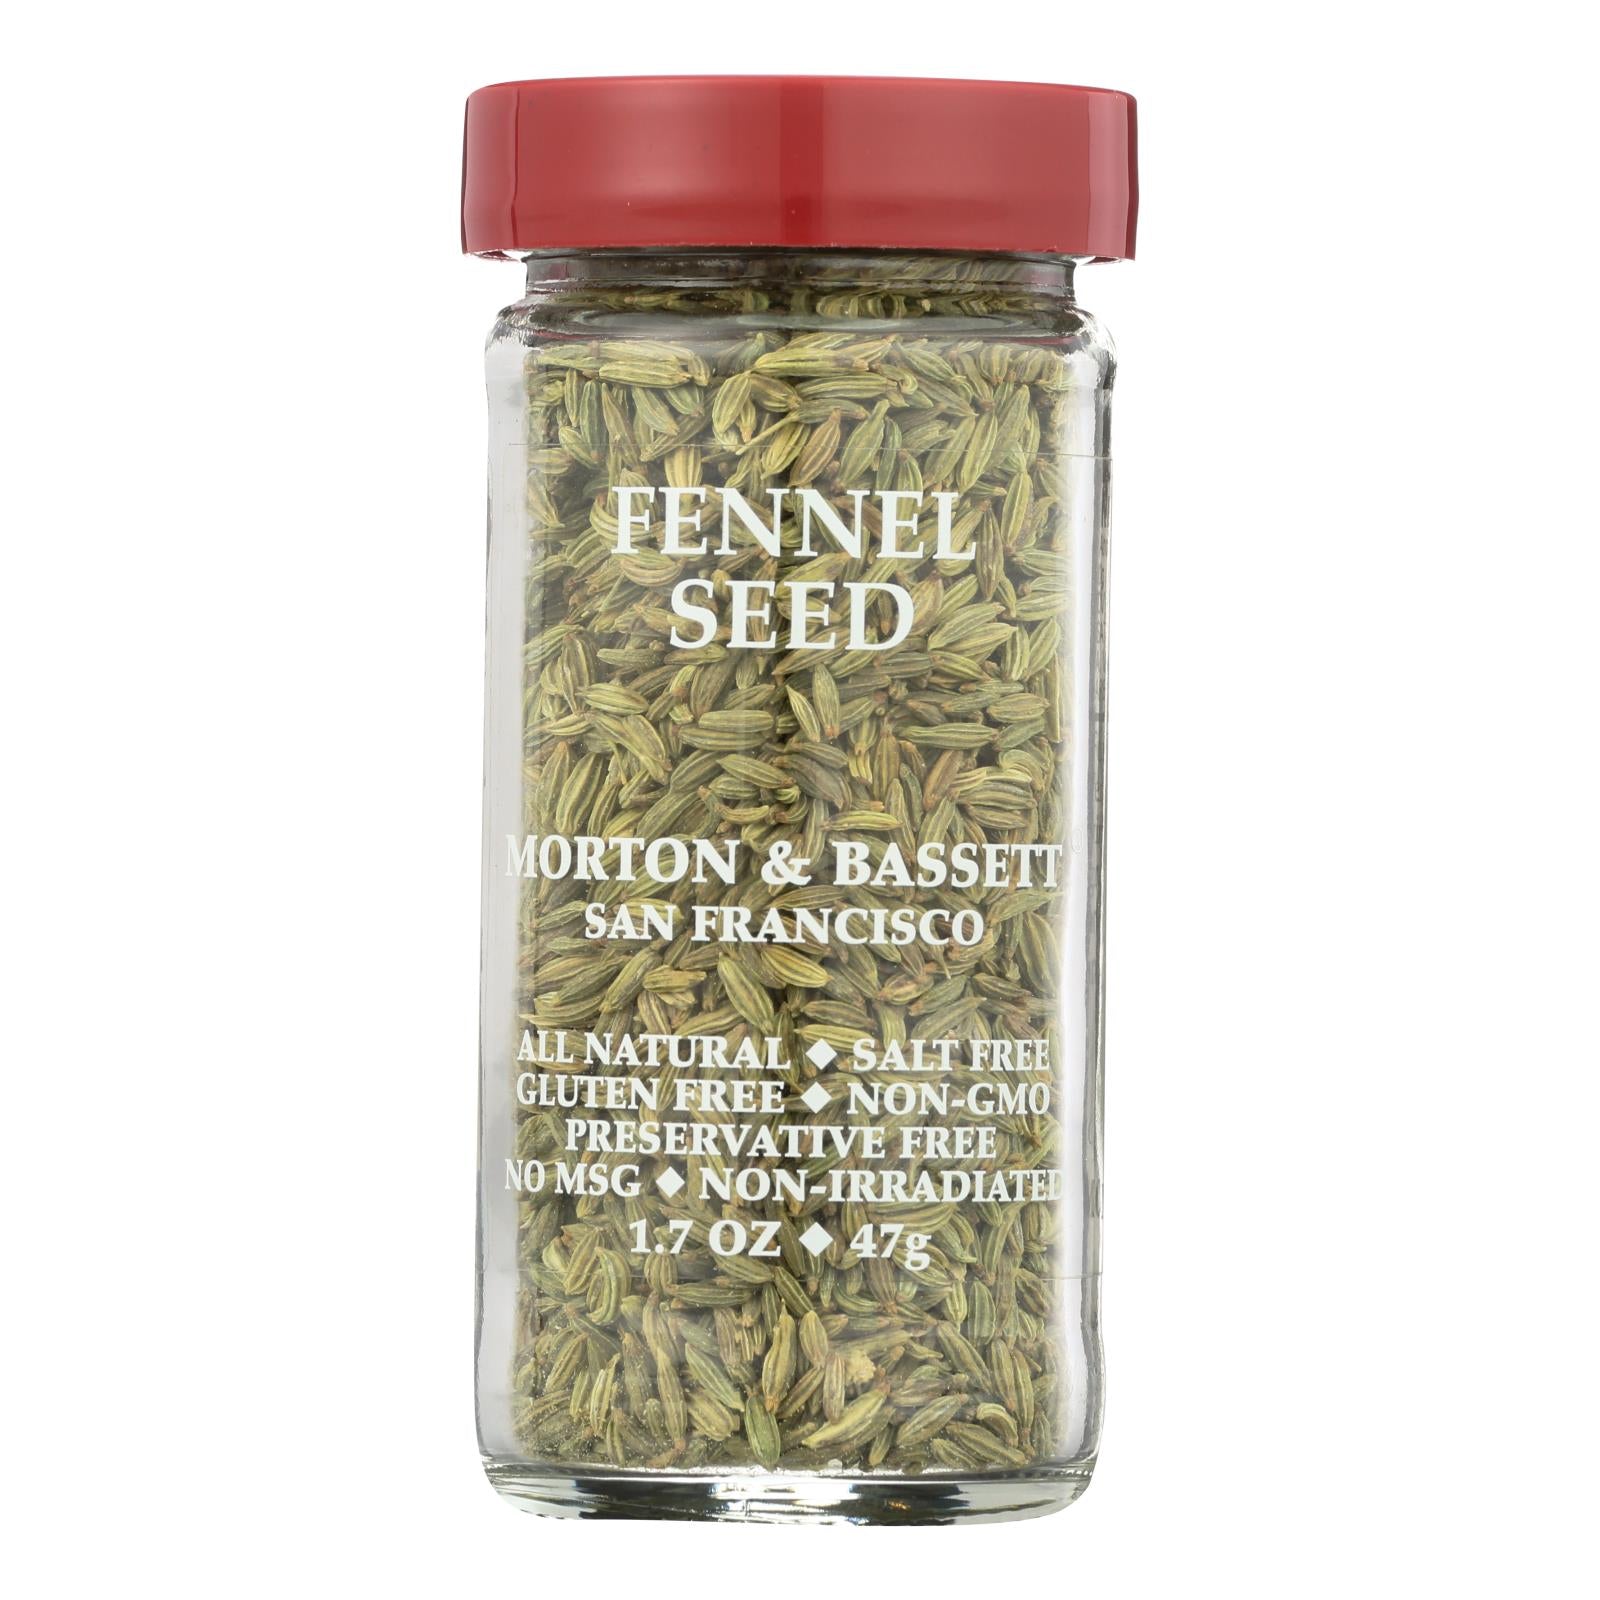 Morton And Bassett Seasoning - Fennel Seed - 1.9 Oz - Case Of 3 - Whole Green Foods